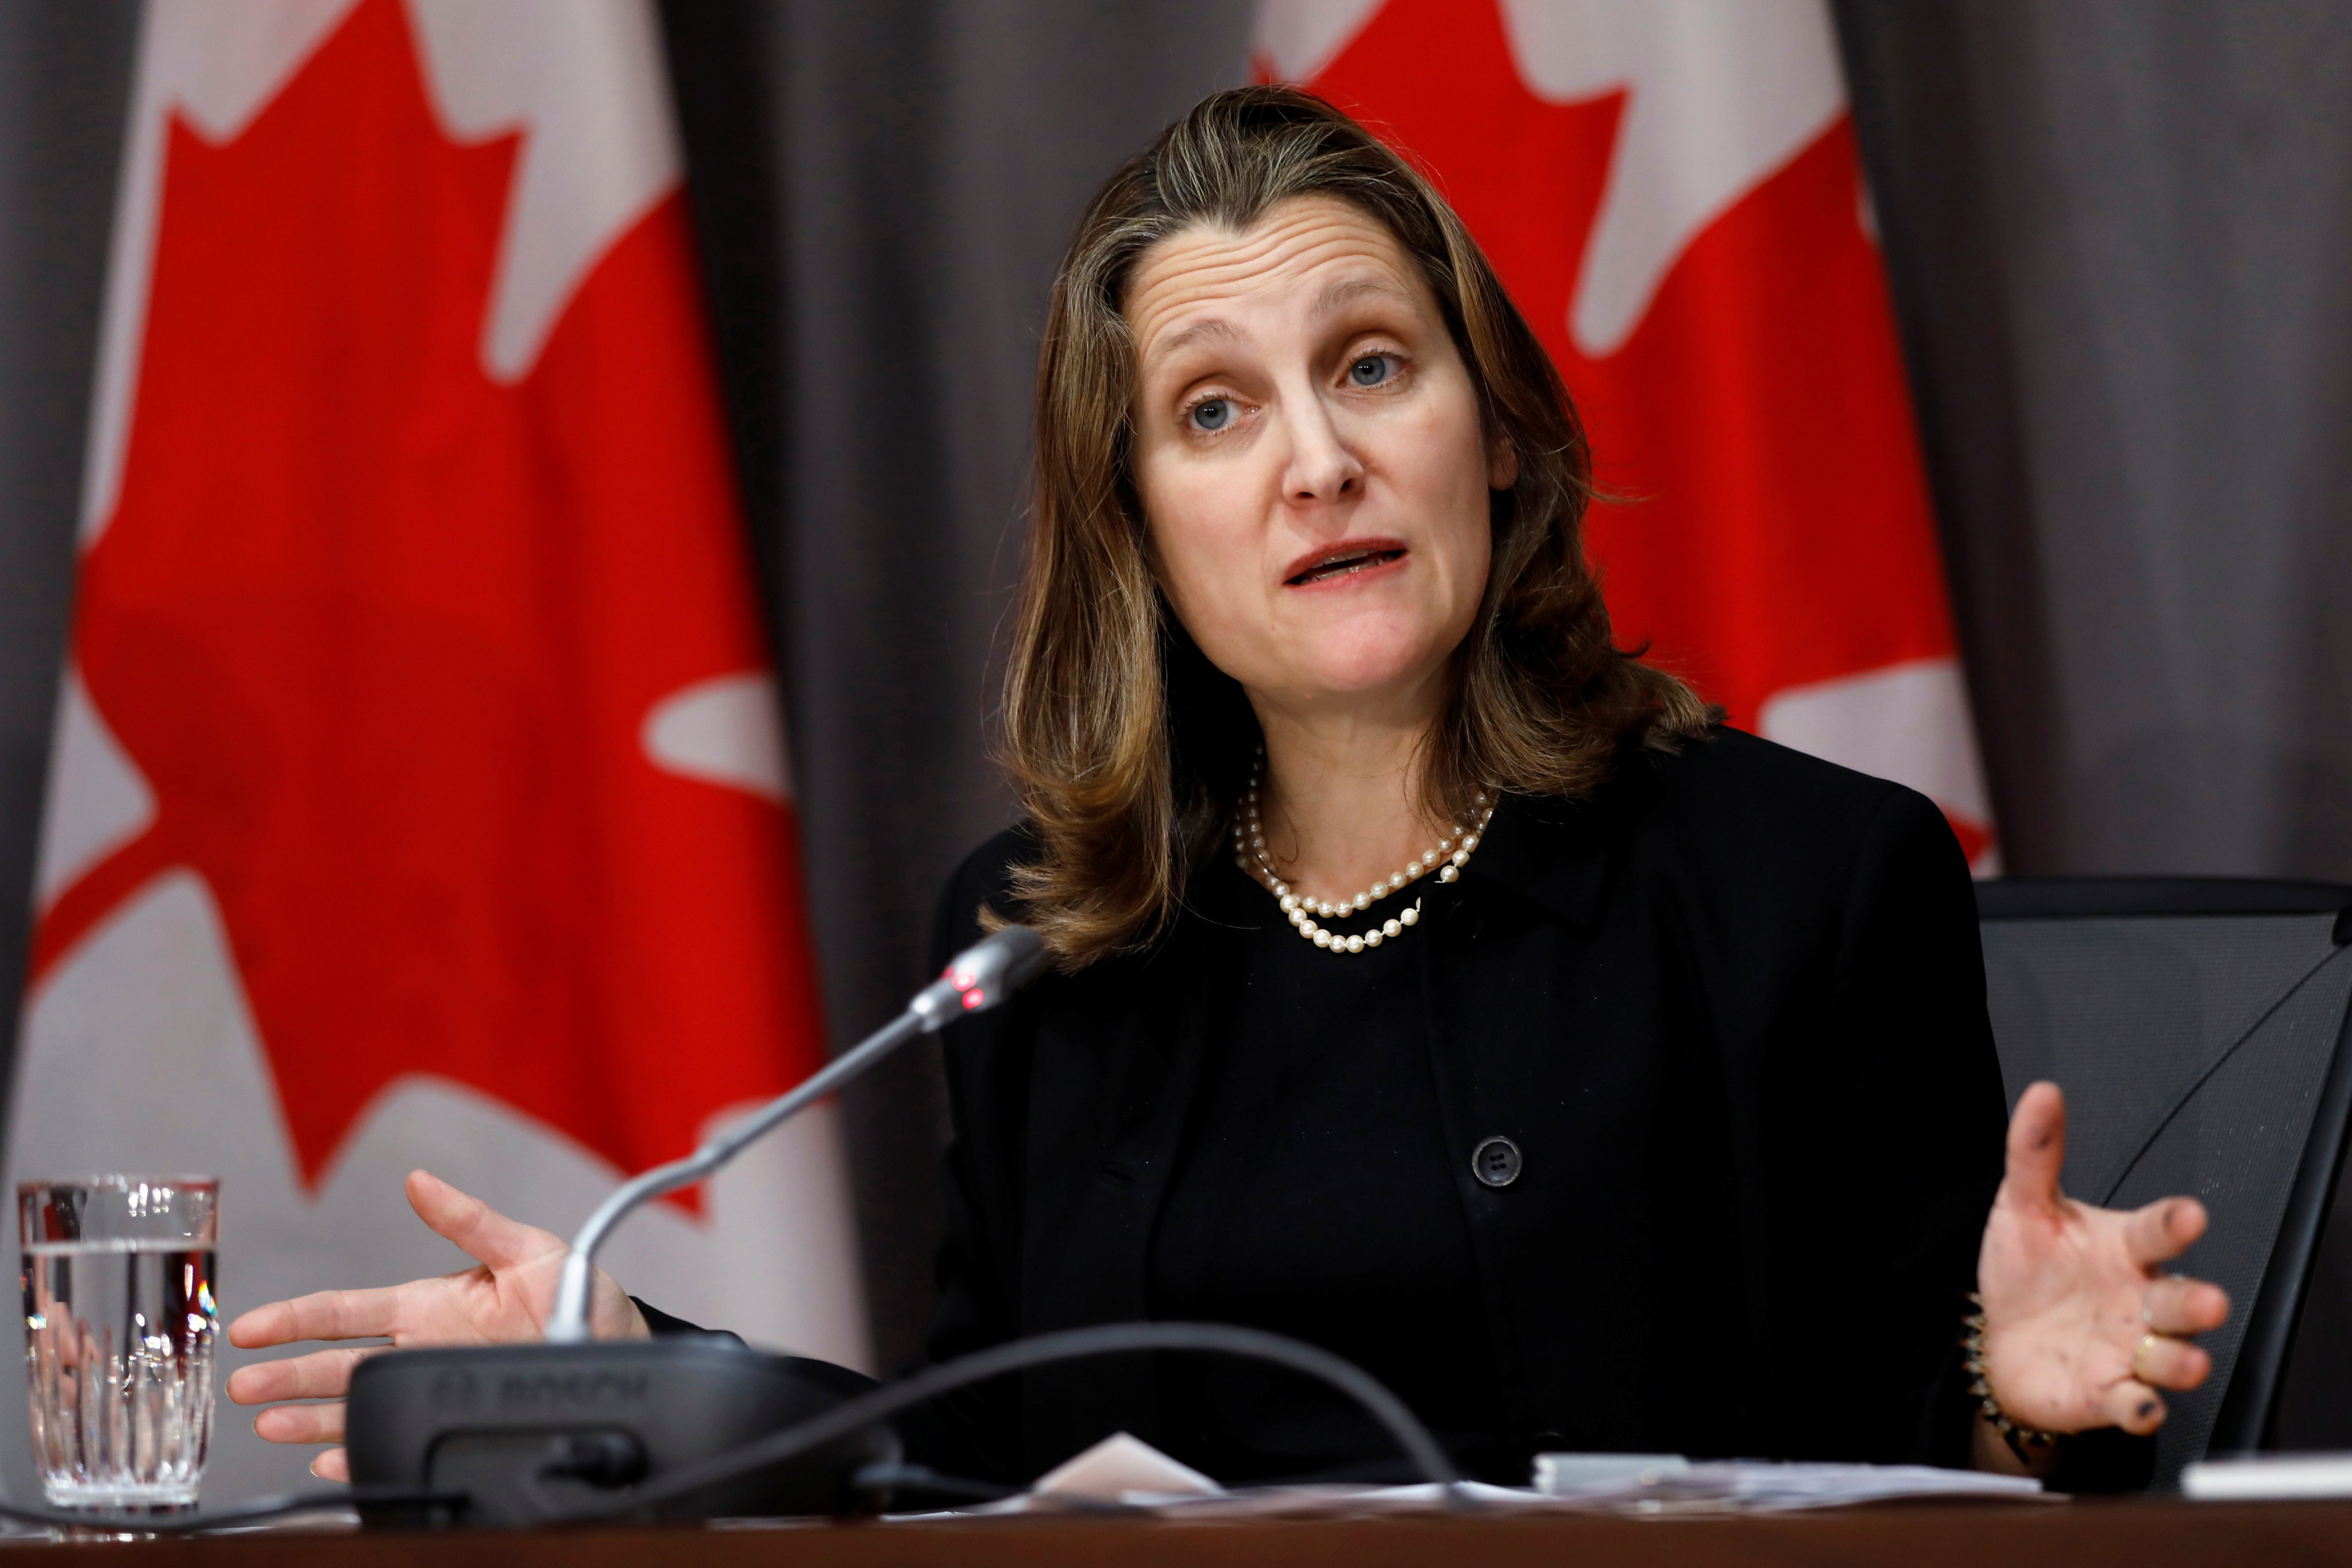 Chrystia Freeland, Canada’s deputy prime minister and finance minister, has called for an immediate investigation into the allegations surrounding the Asian Infrastructure Investment Bank. Photo: Reuters